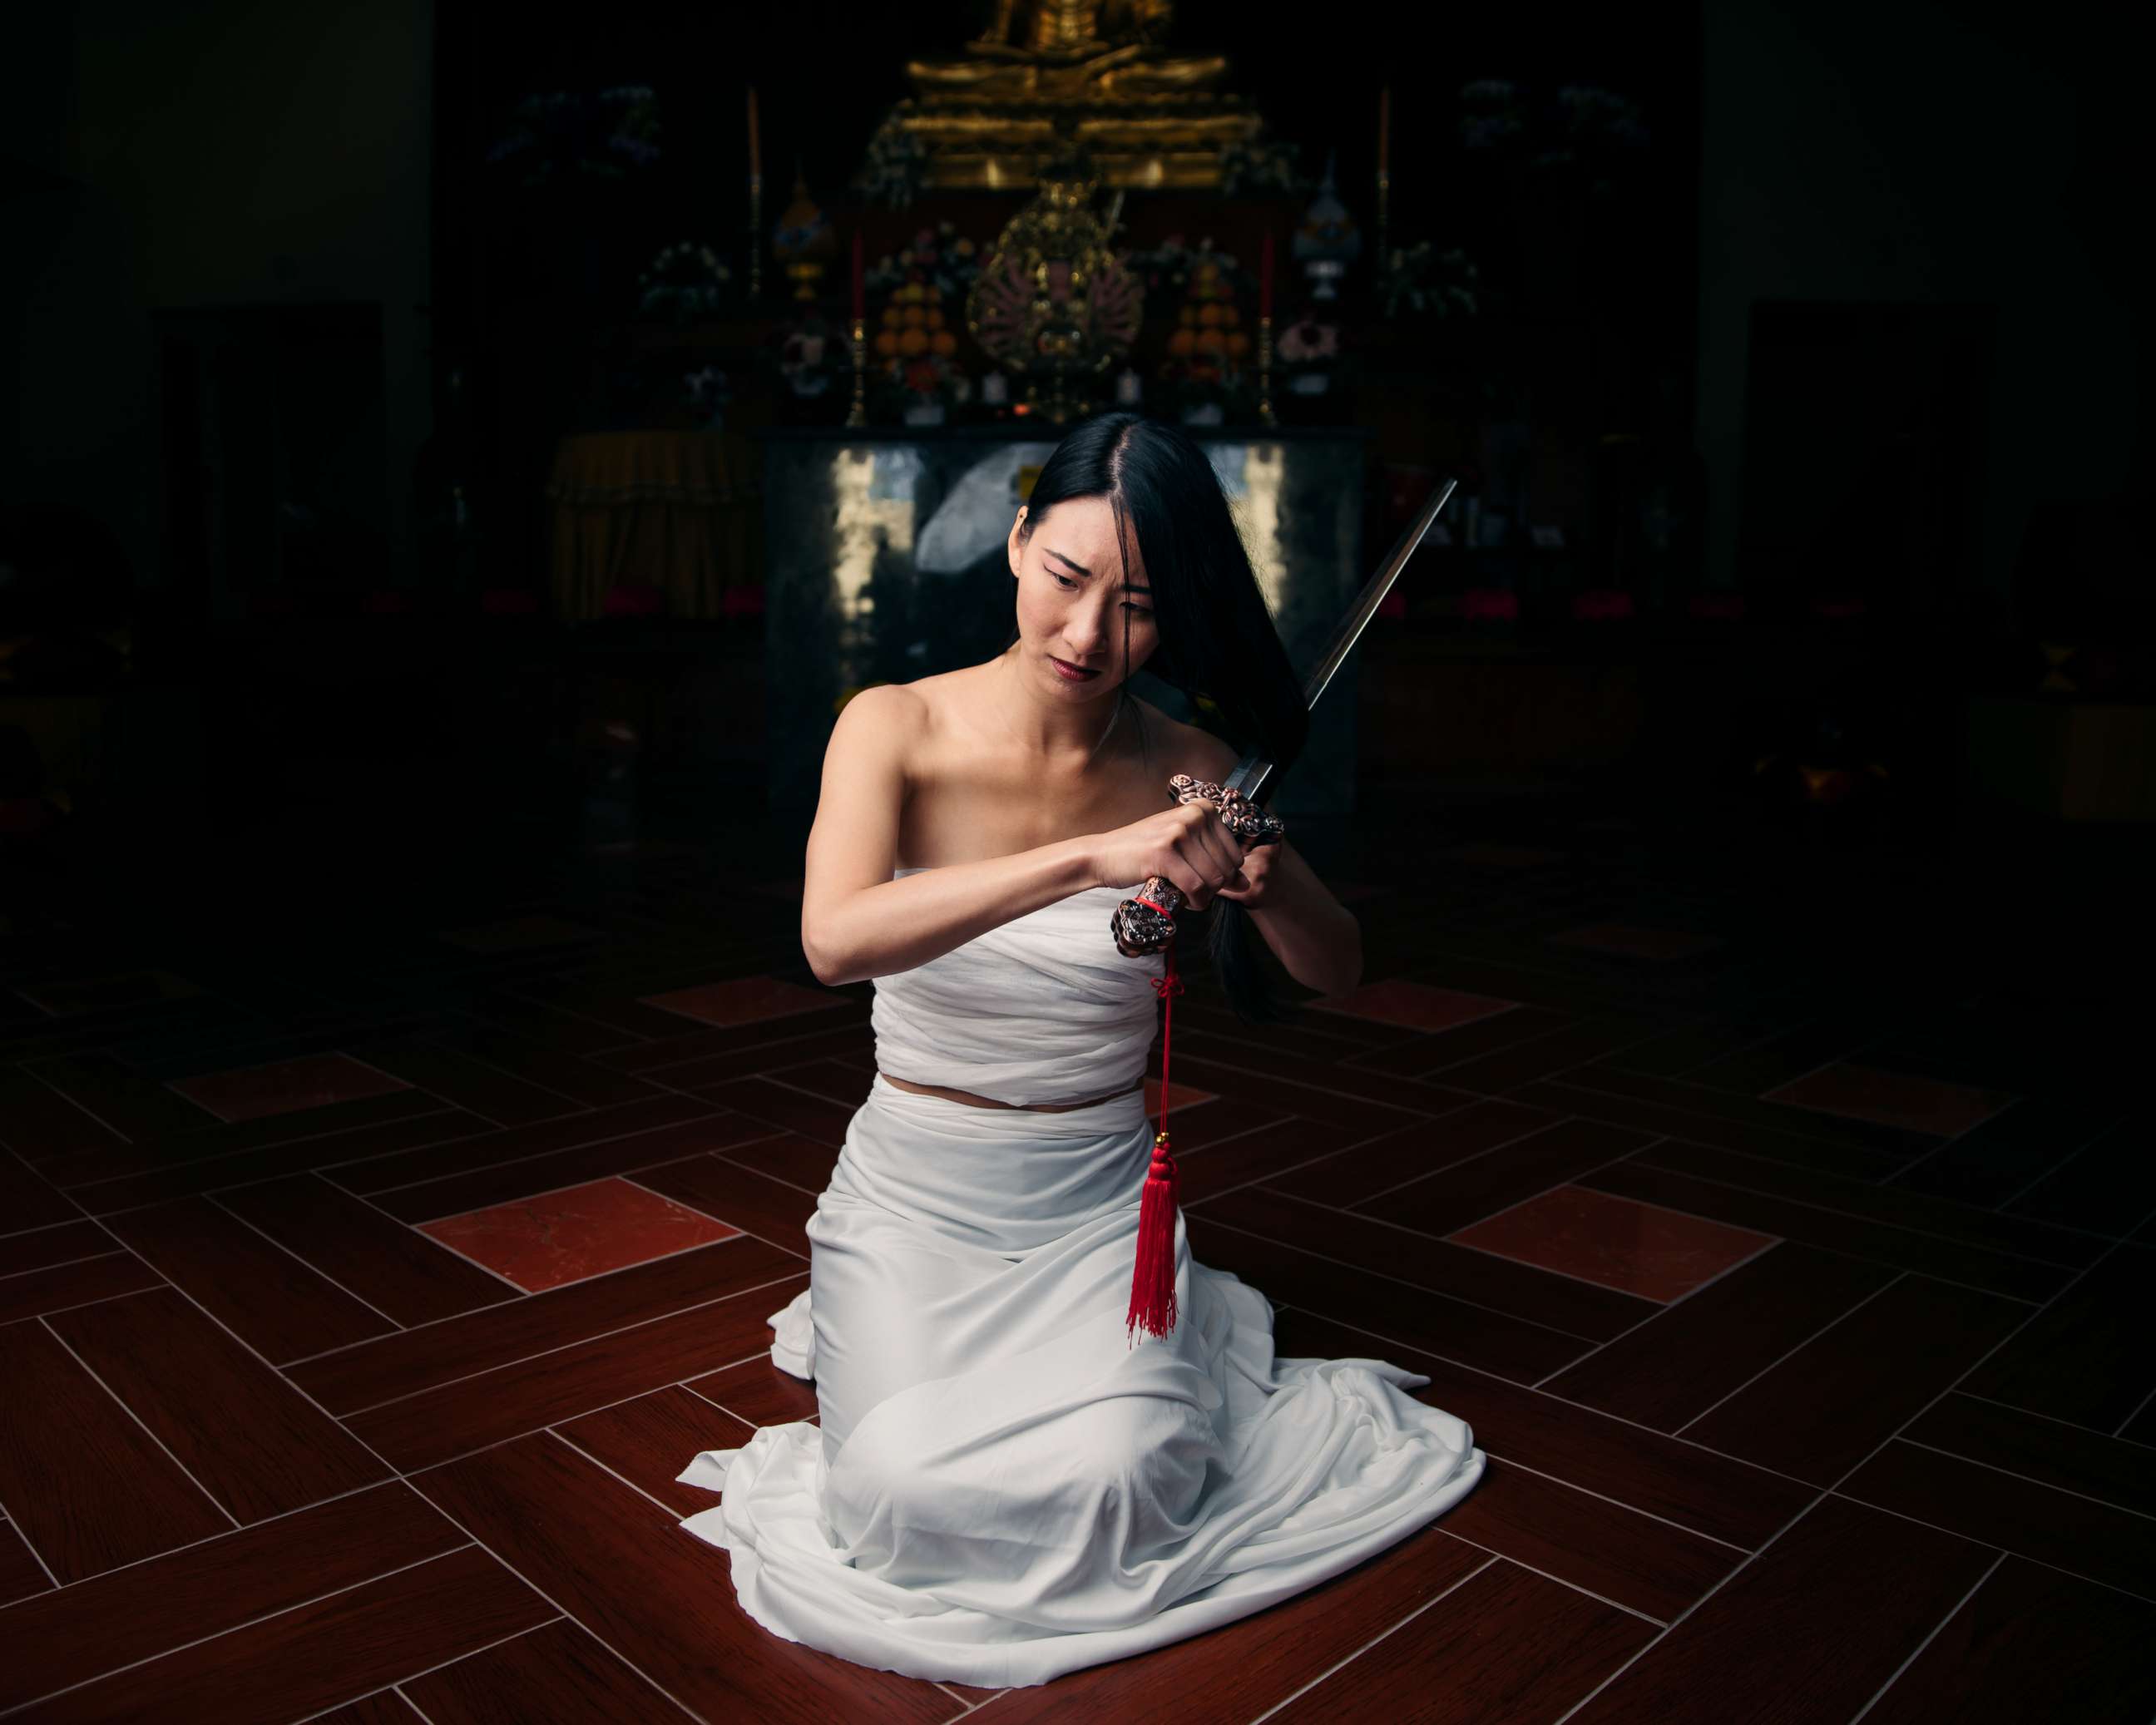 PHOTO: Leslie Nhan poses as Mulan in a photo shoot conceptualized by designer Nephi Garcia and photographer Tony Ross.